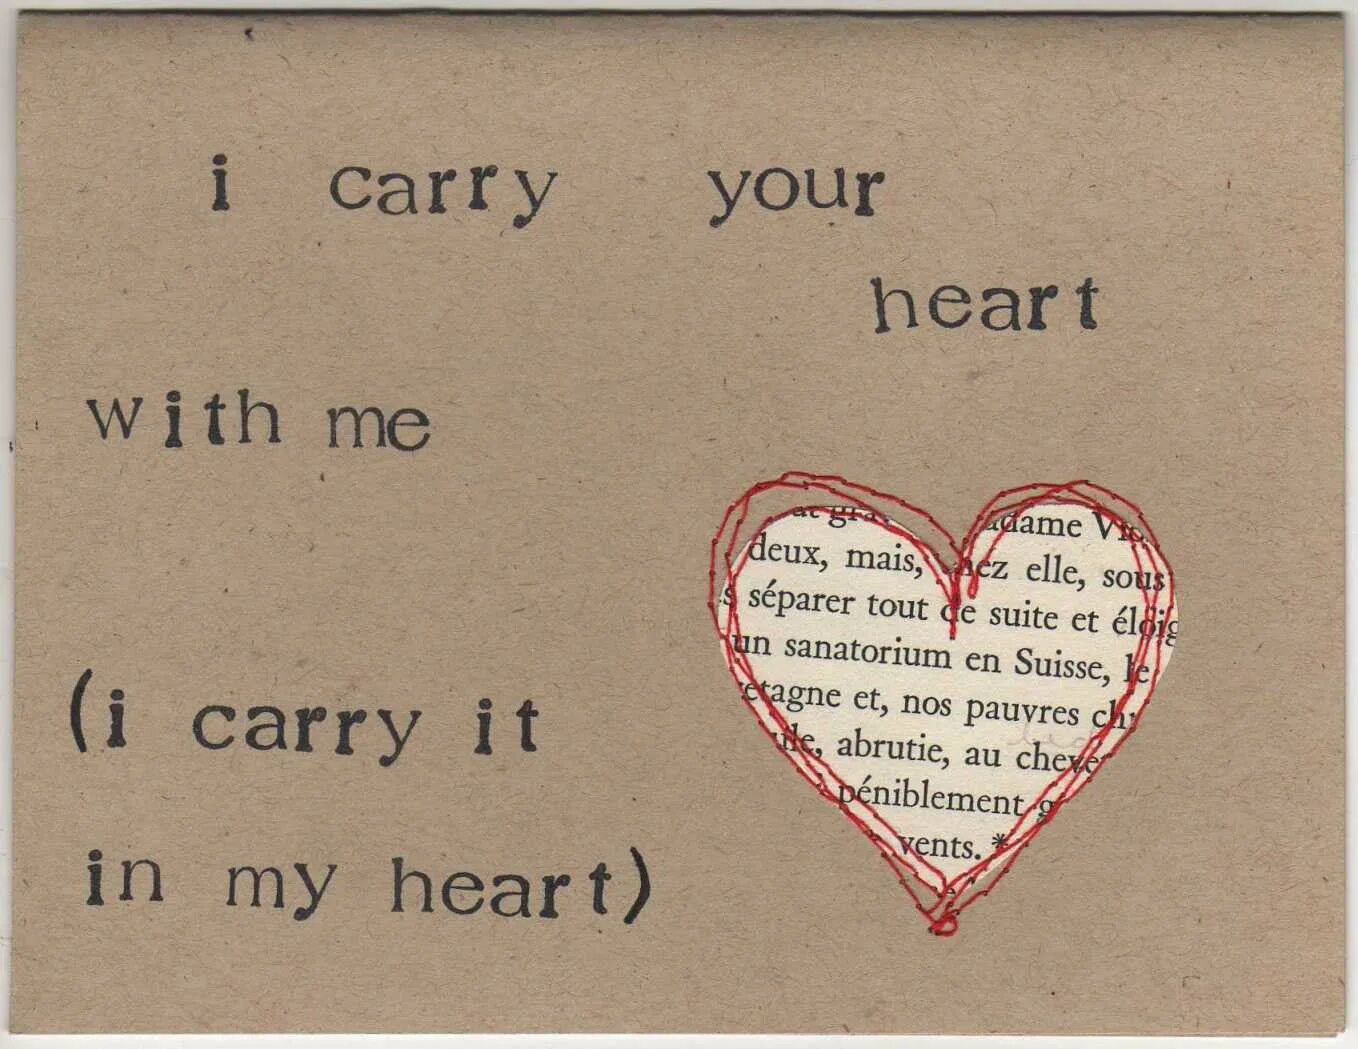 Words of your heart. Кулон i carry your Heart with me. I carry your Heart with me стих. I carry your Heart with me poem. Carry your Heart in mine.